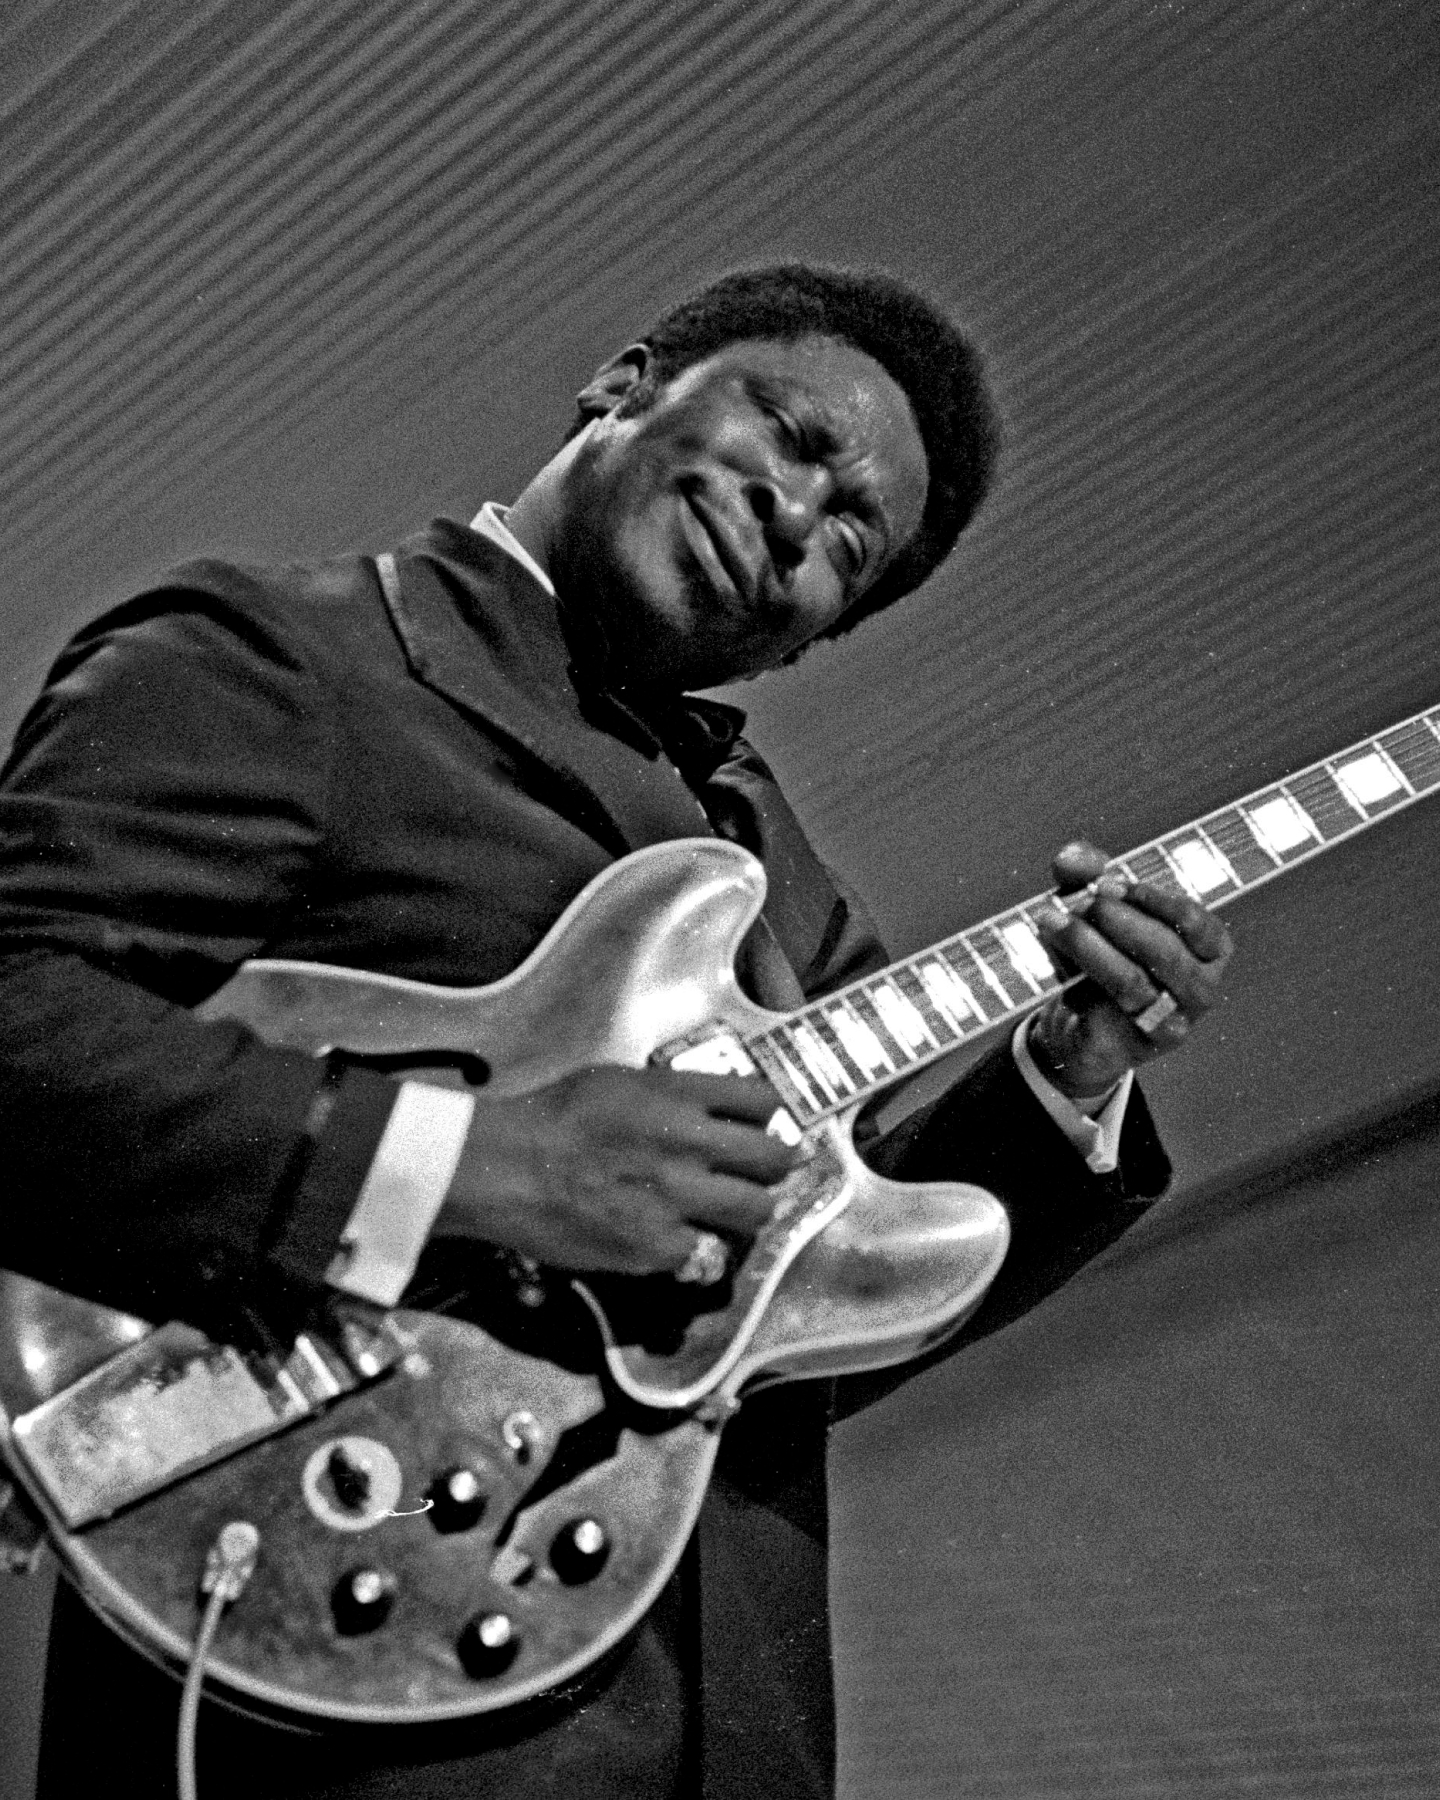 Black and white image of B.B. King playing his guitar Lucille on stage